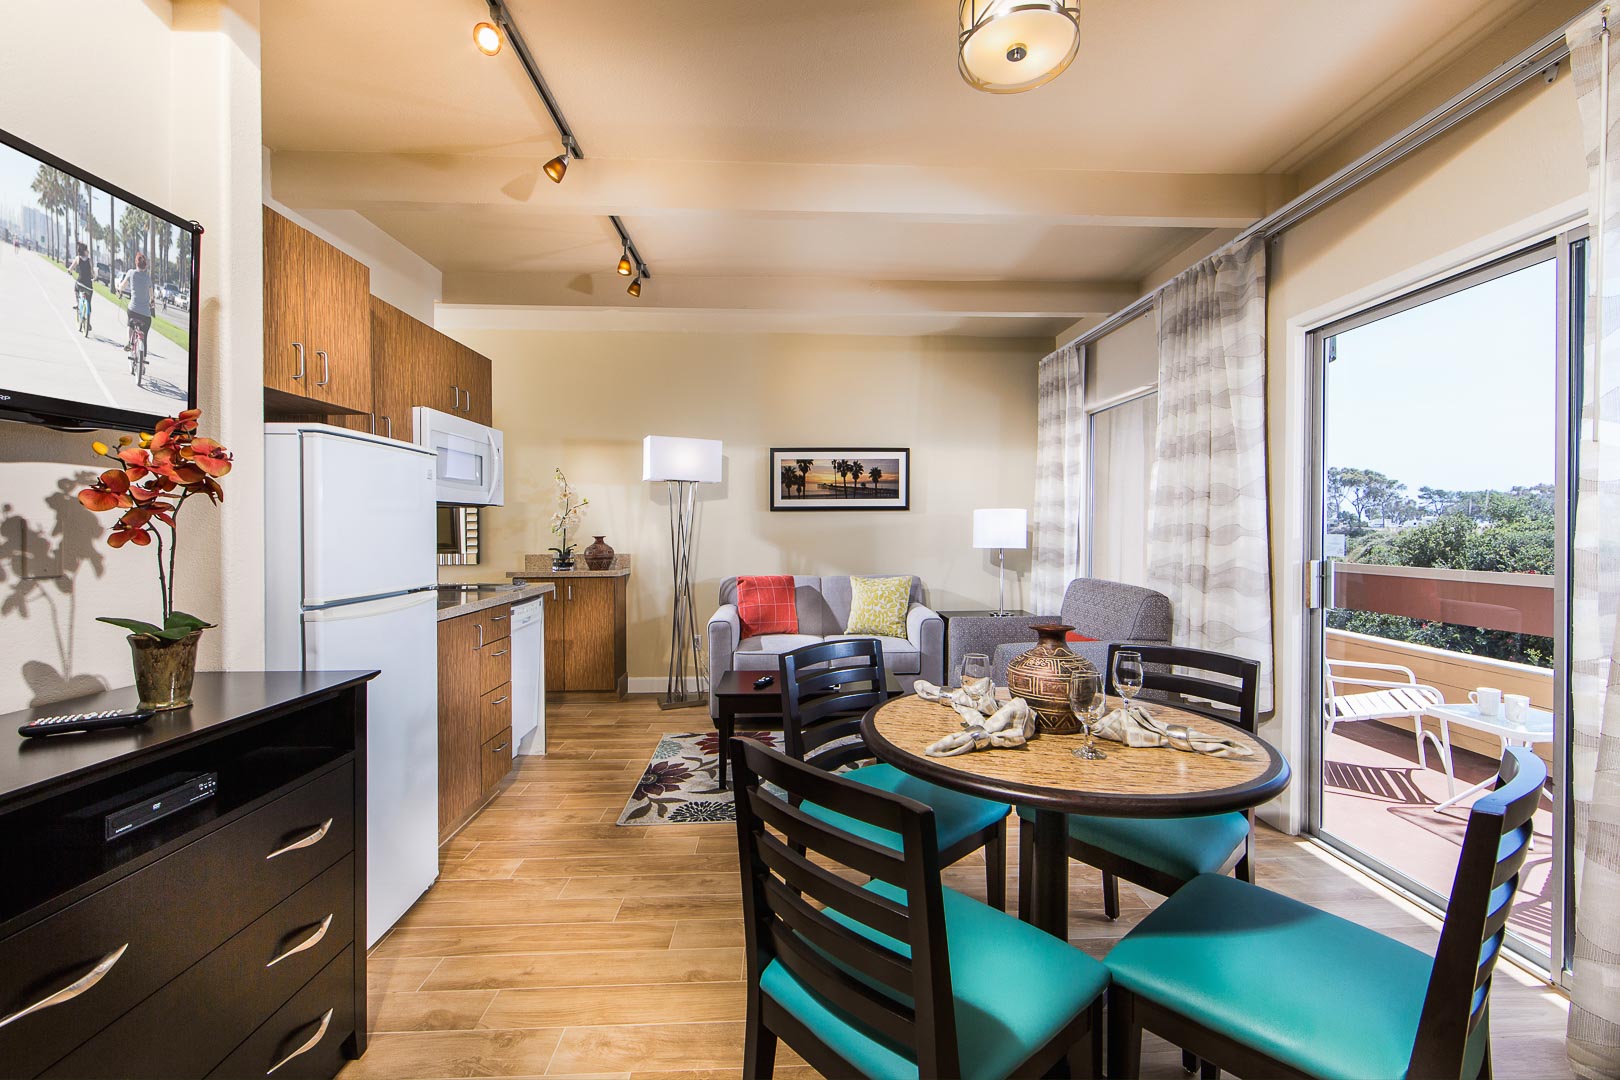 A one bedroom unit with a kitchenette at VRI's San Clemente Inn in California.